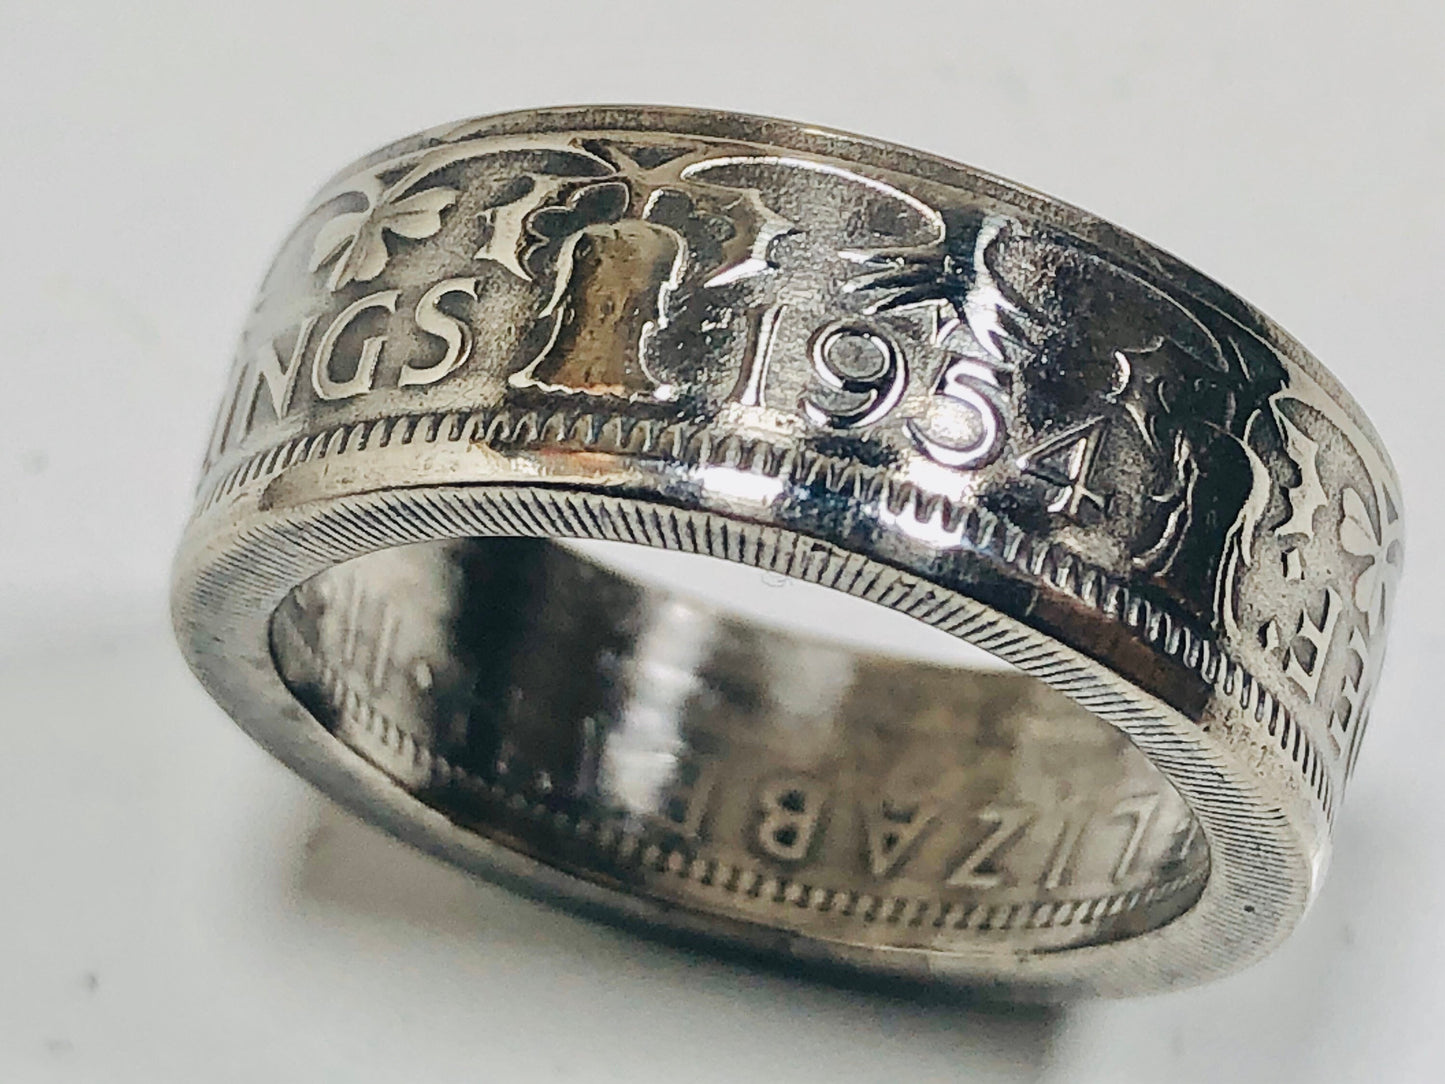 United Kingdom Ring Two Shilling Handmade Scotland Personal Jewelry Ring Gift For Friend Coin Ring Gift For Him Her World Coin Collector